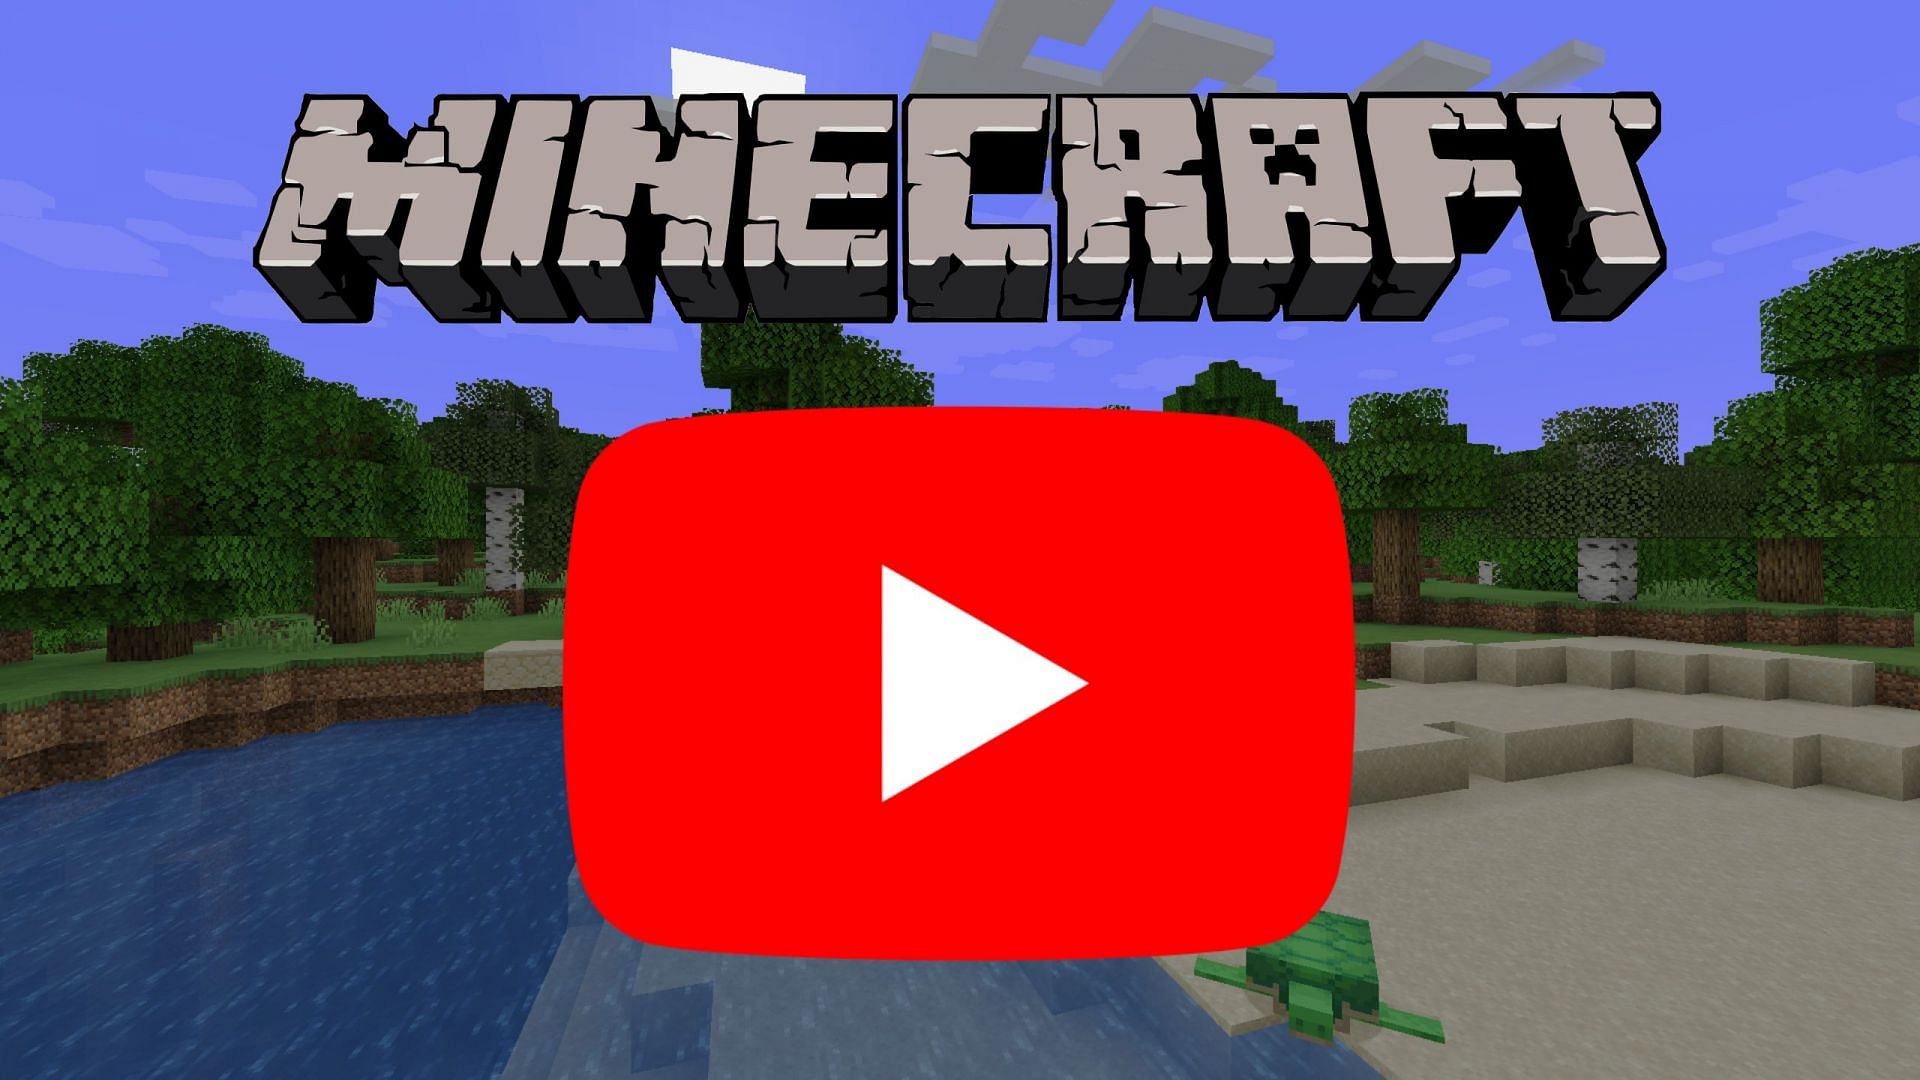 The Youtube and Minecraft logos (Images via Youtube and Mojang)